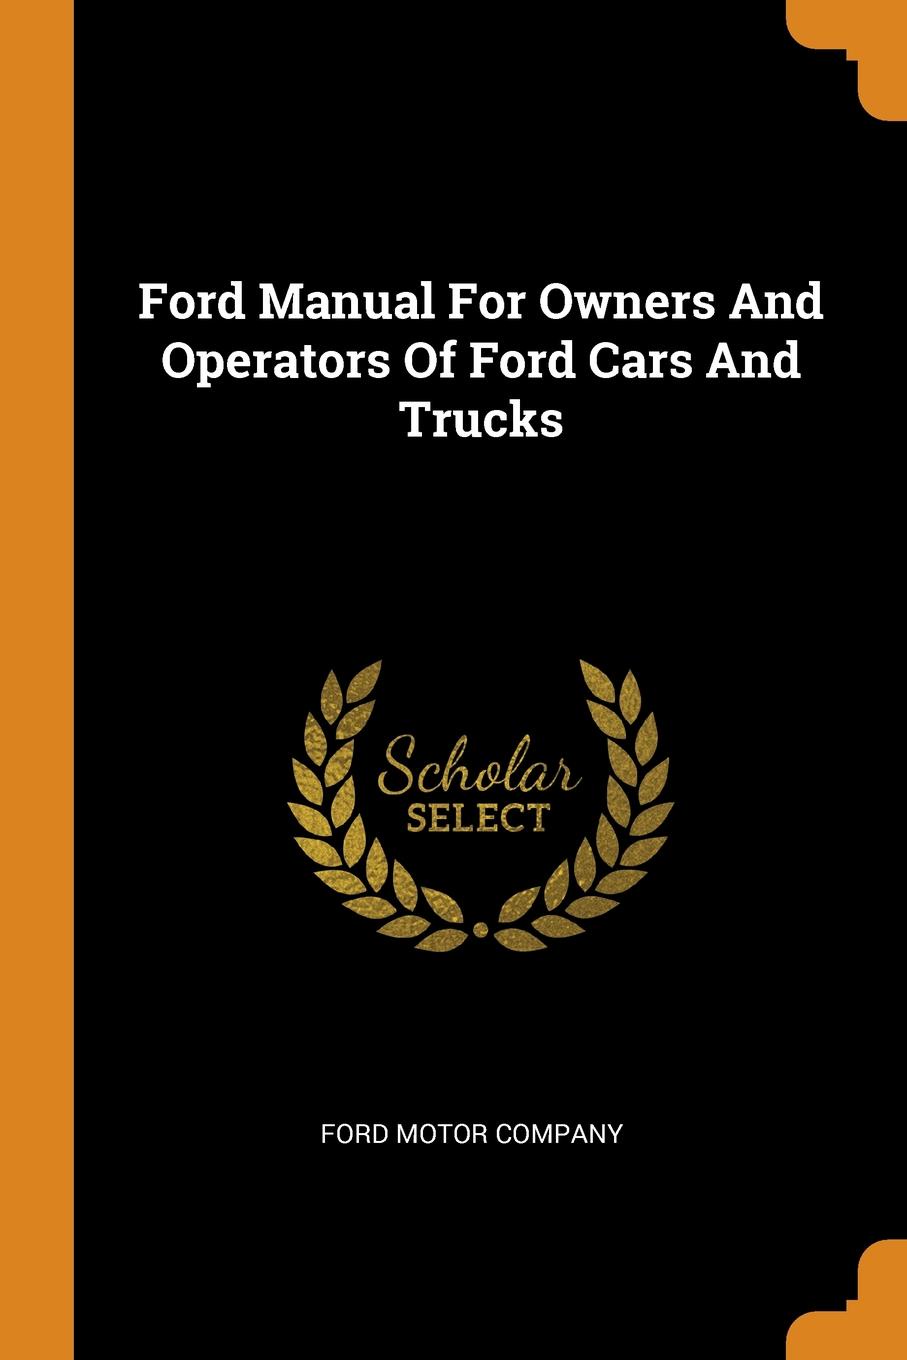 Ford Manual For Owners And Operators Of Ford Cars And Trucks